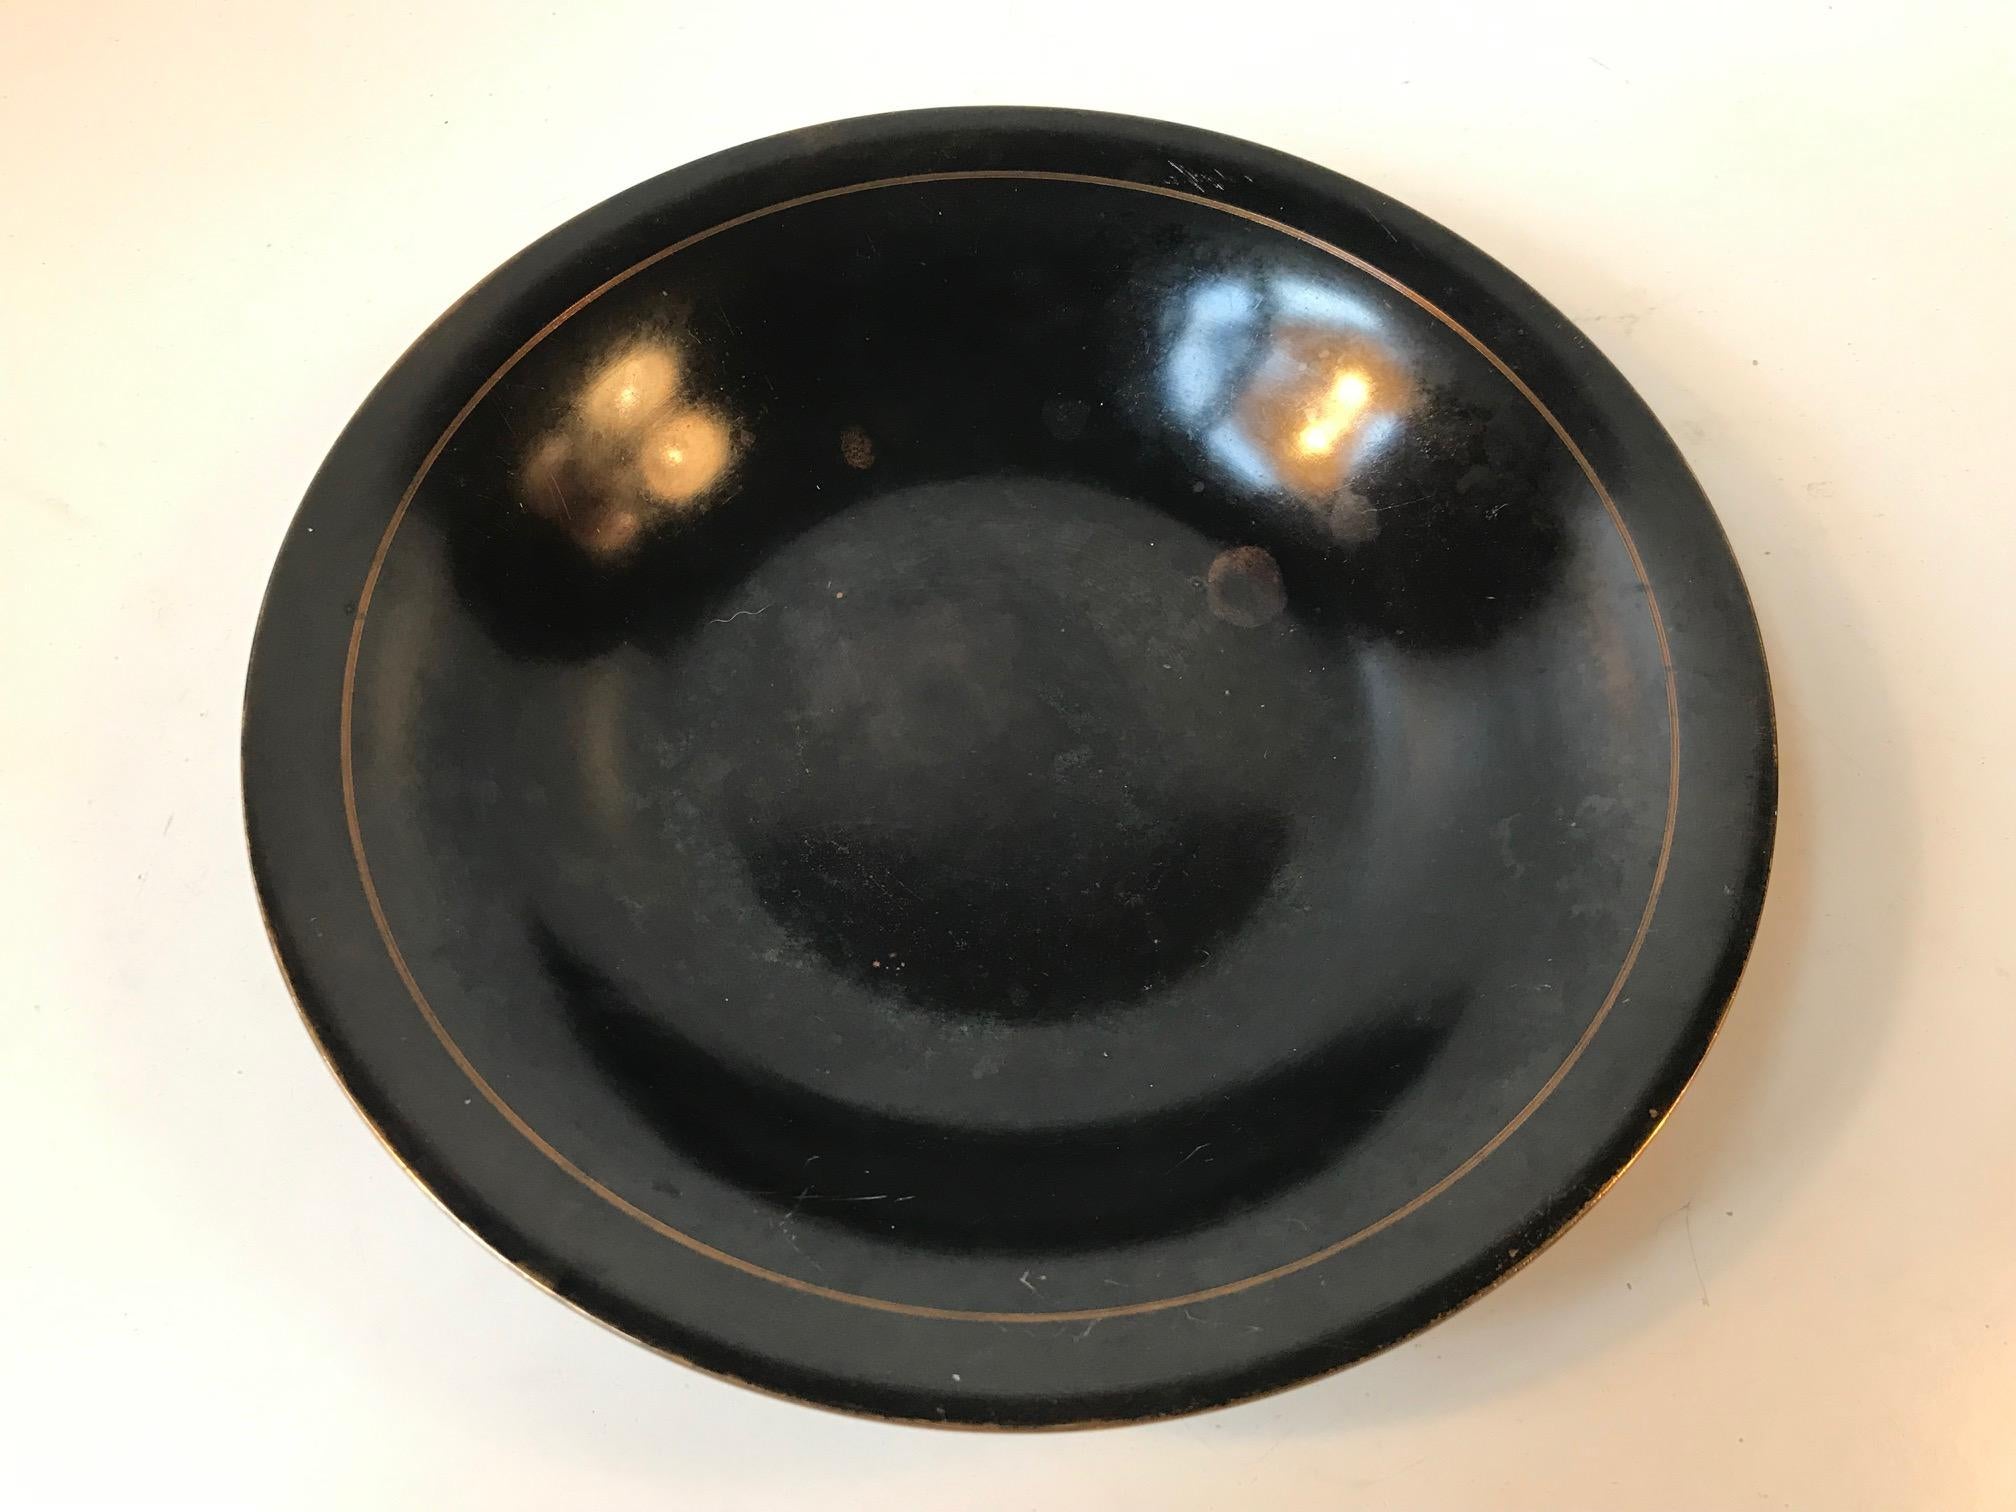 Patinated bronze bowl manufactured and designed by Frederiksberg Bronce in Denmark during the 1930s. The maker's mark and design number can be found on the bottom of the piece.